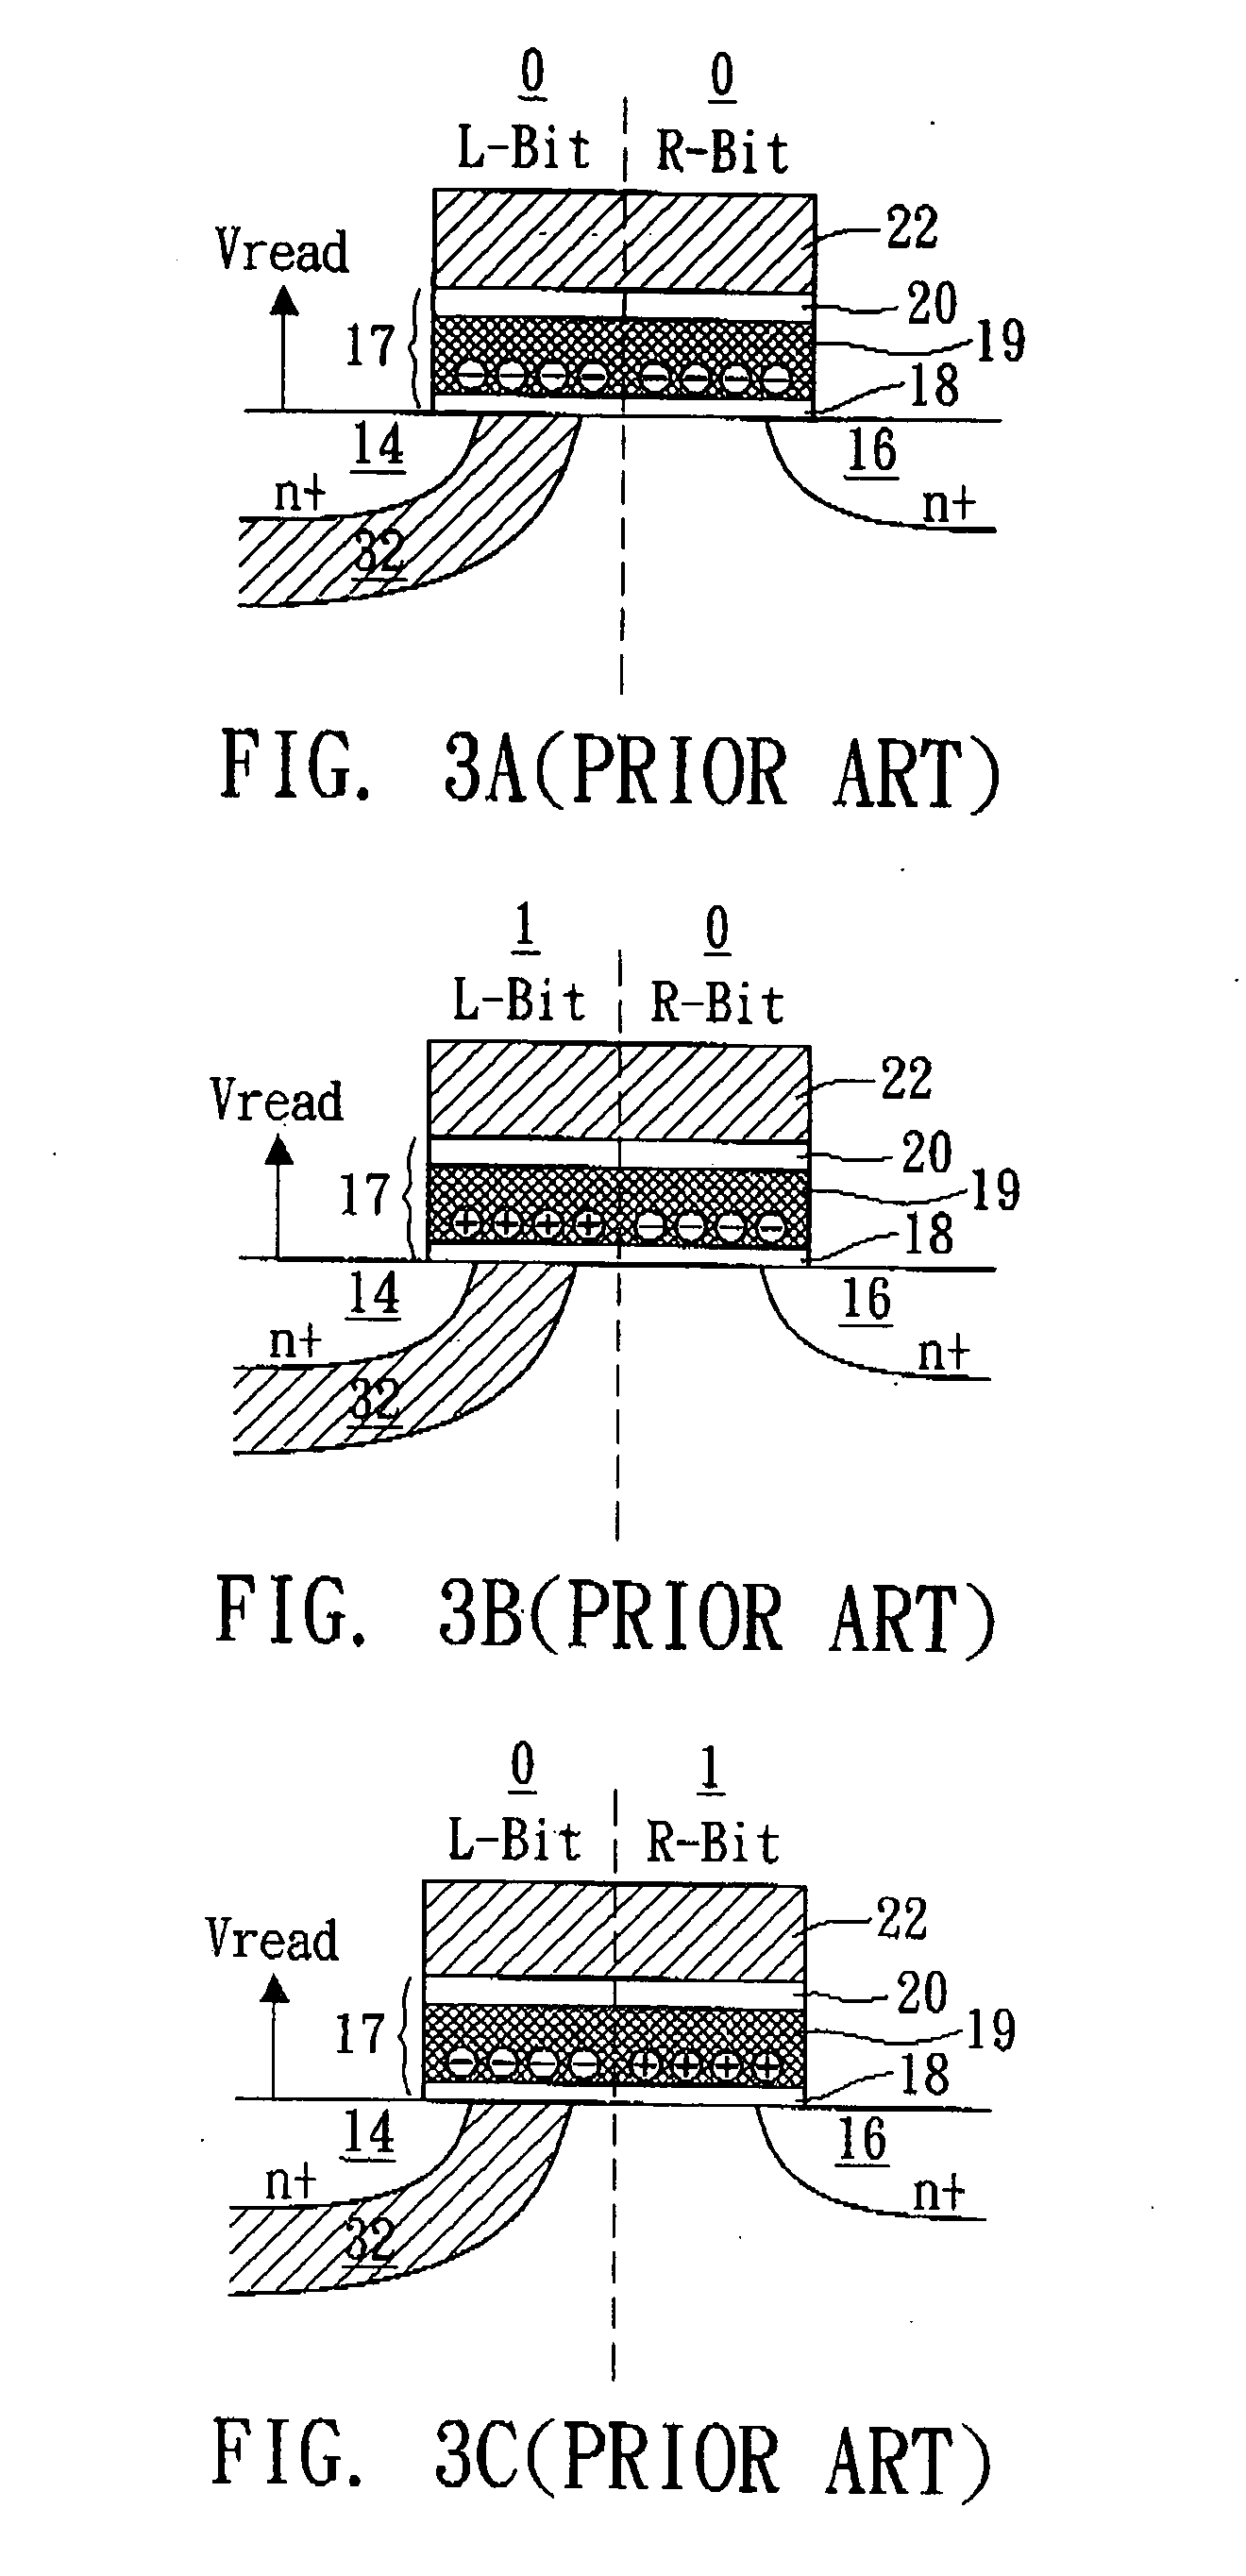 Method of identifying logical information in a programming and erasing cell by on-side reading scheme